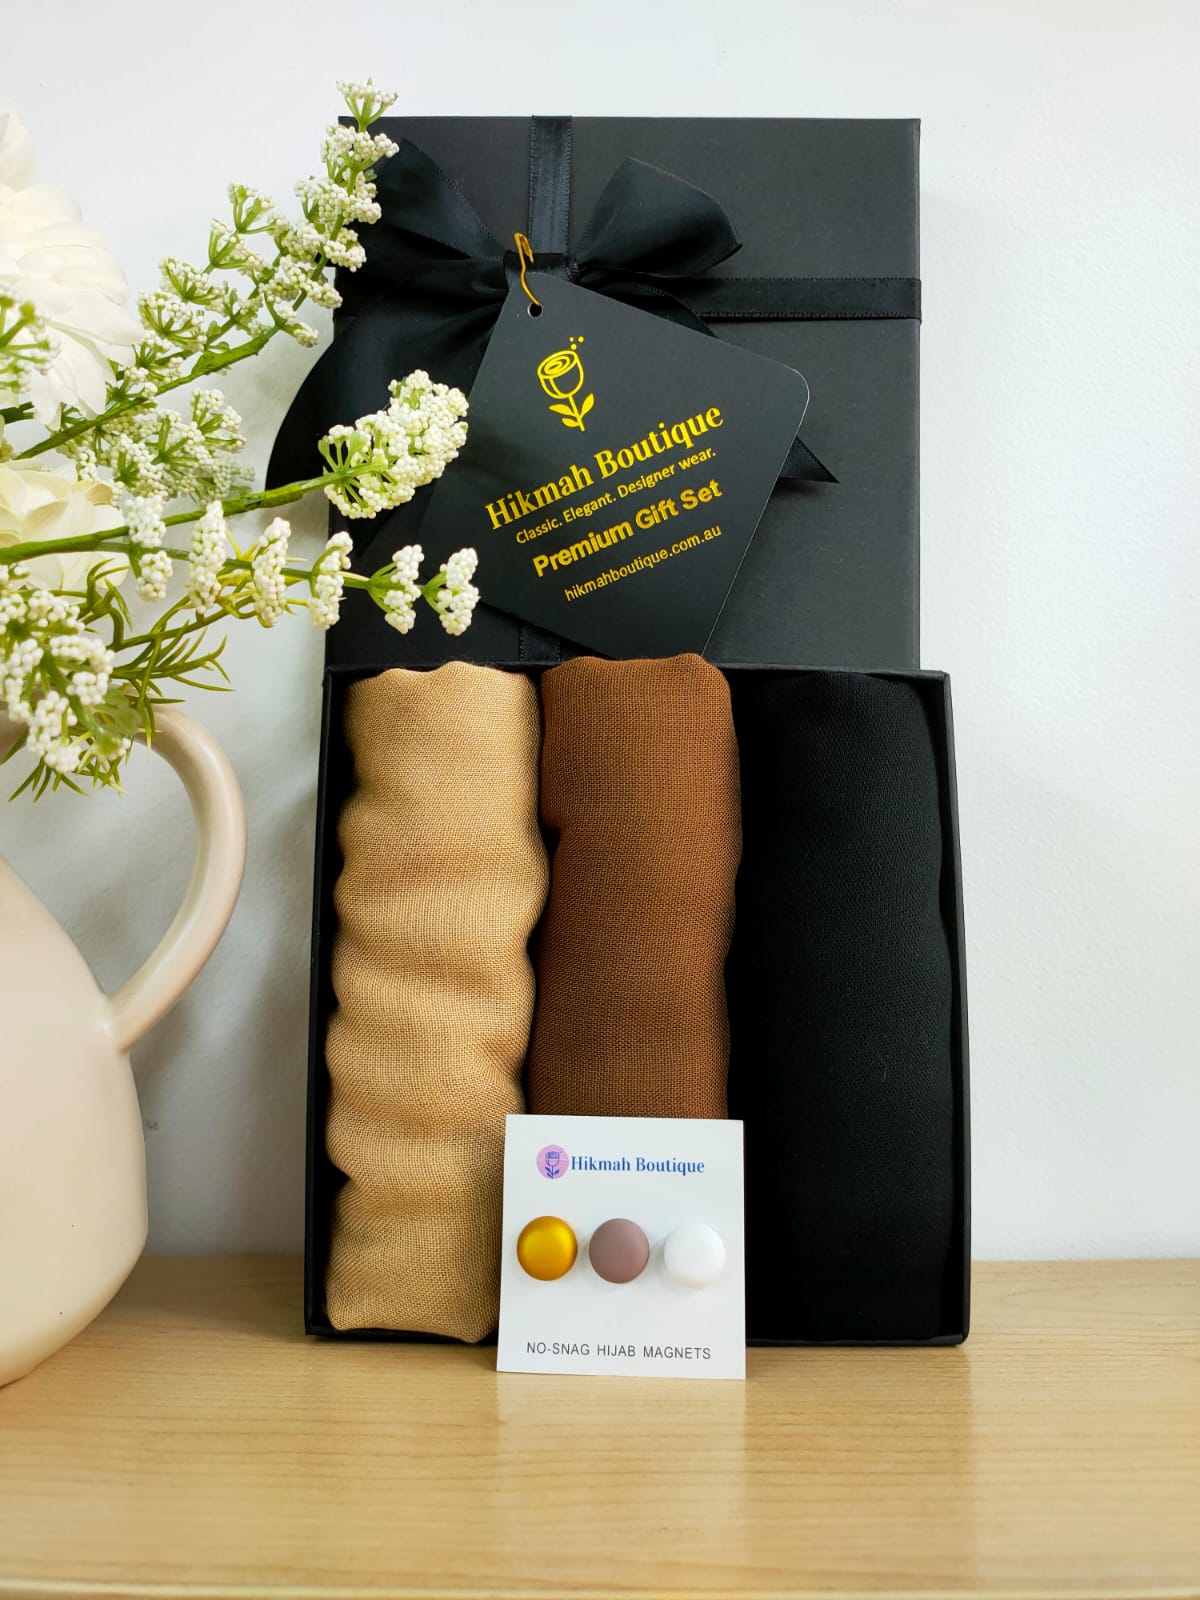 Elevate your gifting experience with our Viscose Hijab Gift Box from the Modest Sandstone Range. Handcrafted with care and offering free shipping, our exclusive Islamic gift sets are perfect for Ramadan and special occasions. Shop now at Hikmah Boutique to discover the perfect gift for her.